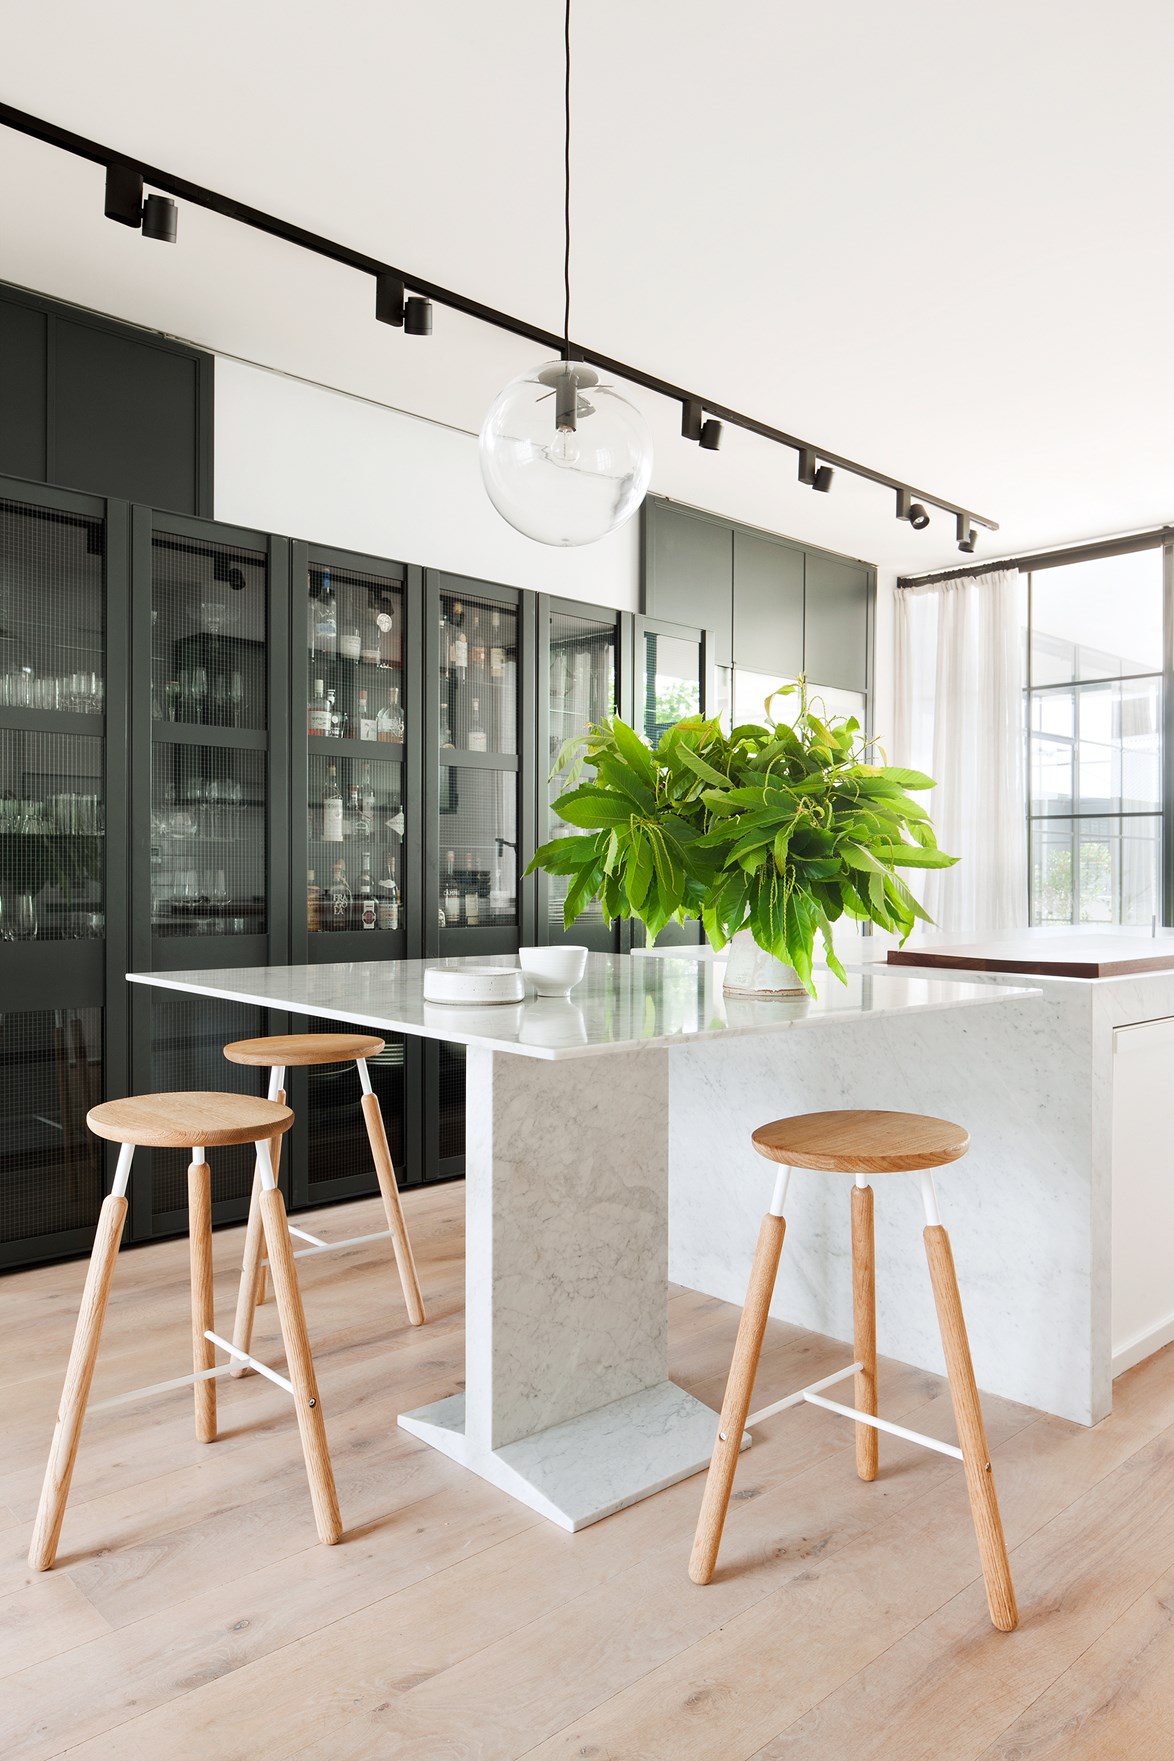 What was once an [inner-city Melbourne pub](https://www.homestolove.com.au/last-drinks-luxe-melbourne-pub-conversion-3749|target="_blank") is now a family home with sophisticated Scandi style. The expansive rooms allowed architect [Hecker Guthrie](https://www.heckerguthrie.com/|target="_blank") and interior designer [Simone Haag](https://www.homestolove.com.au/stylist-simone-haags-seamless-scandi-style-home-4012|target="_blank") to push the spaces to new heights. This kitchen, for example, features a bench which is for breakfast by-day and for cocktails by-night.